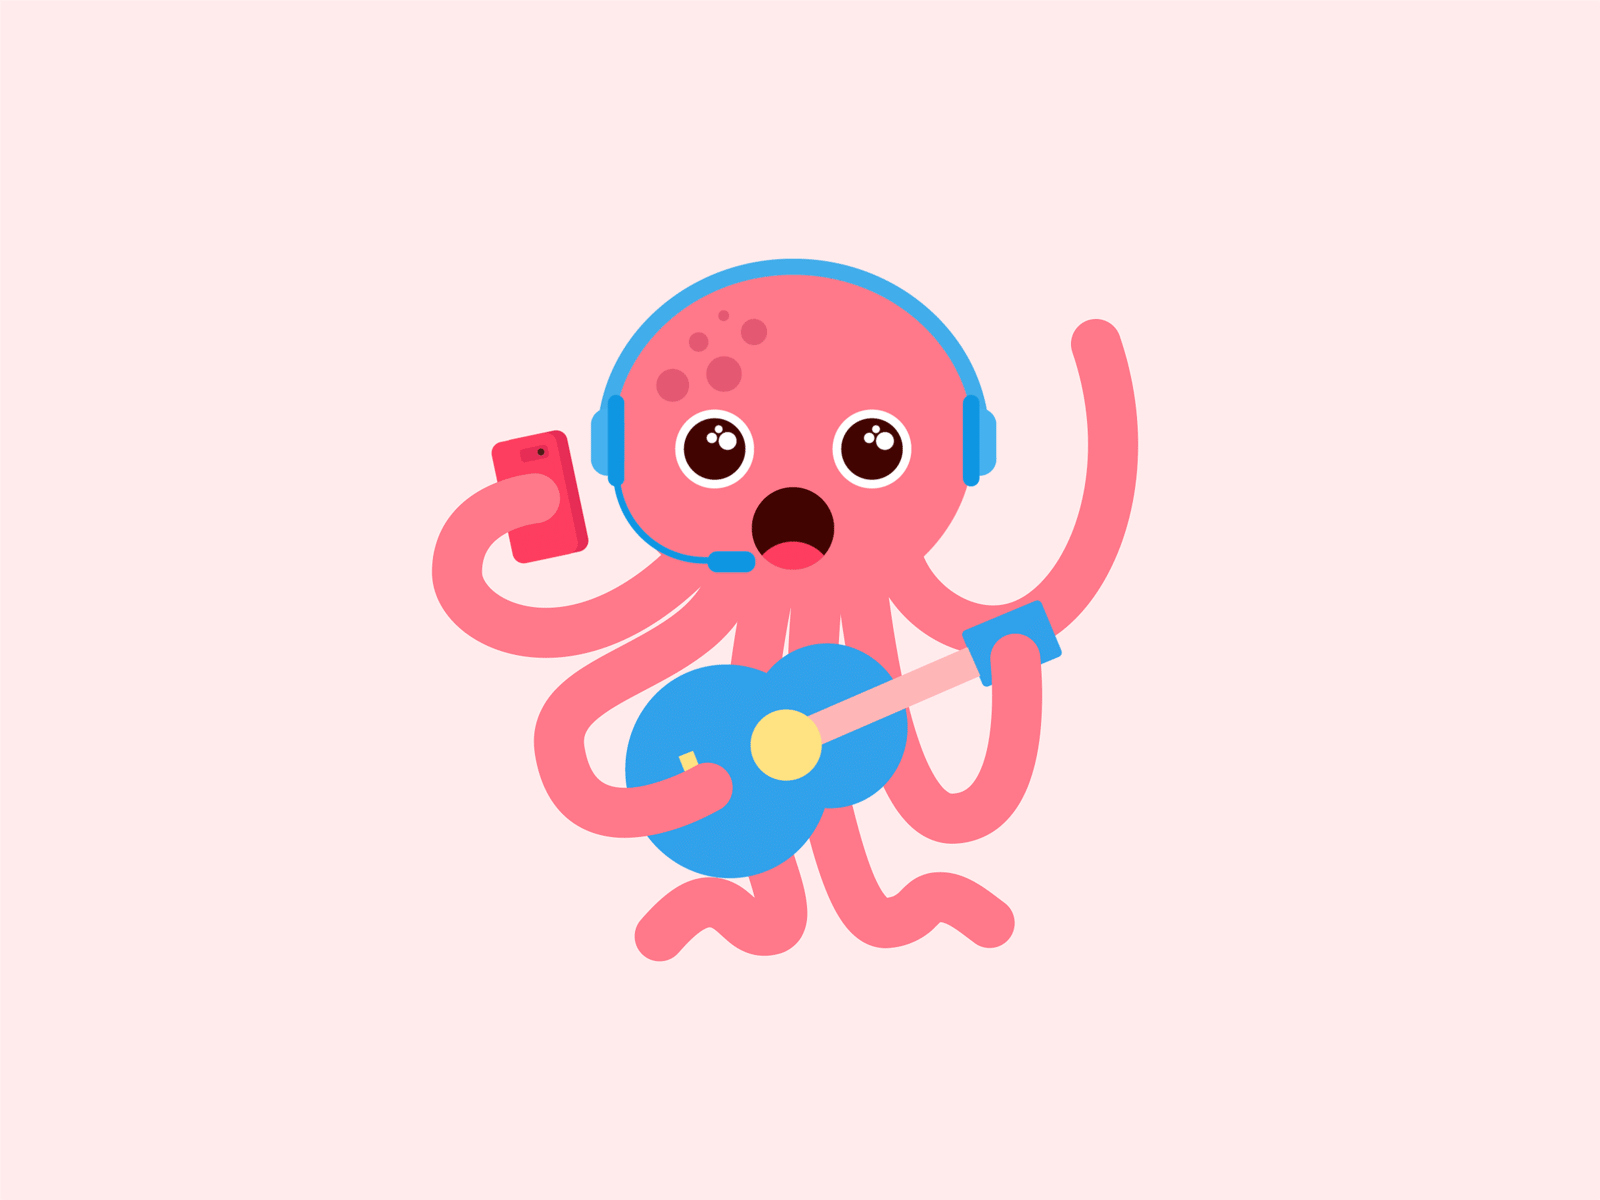 The stupid octopus is playing guitar animals animated gif octopus playing guitar